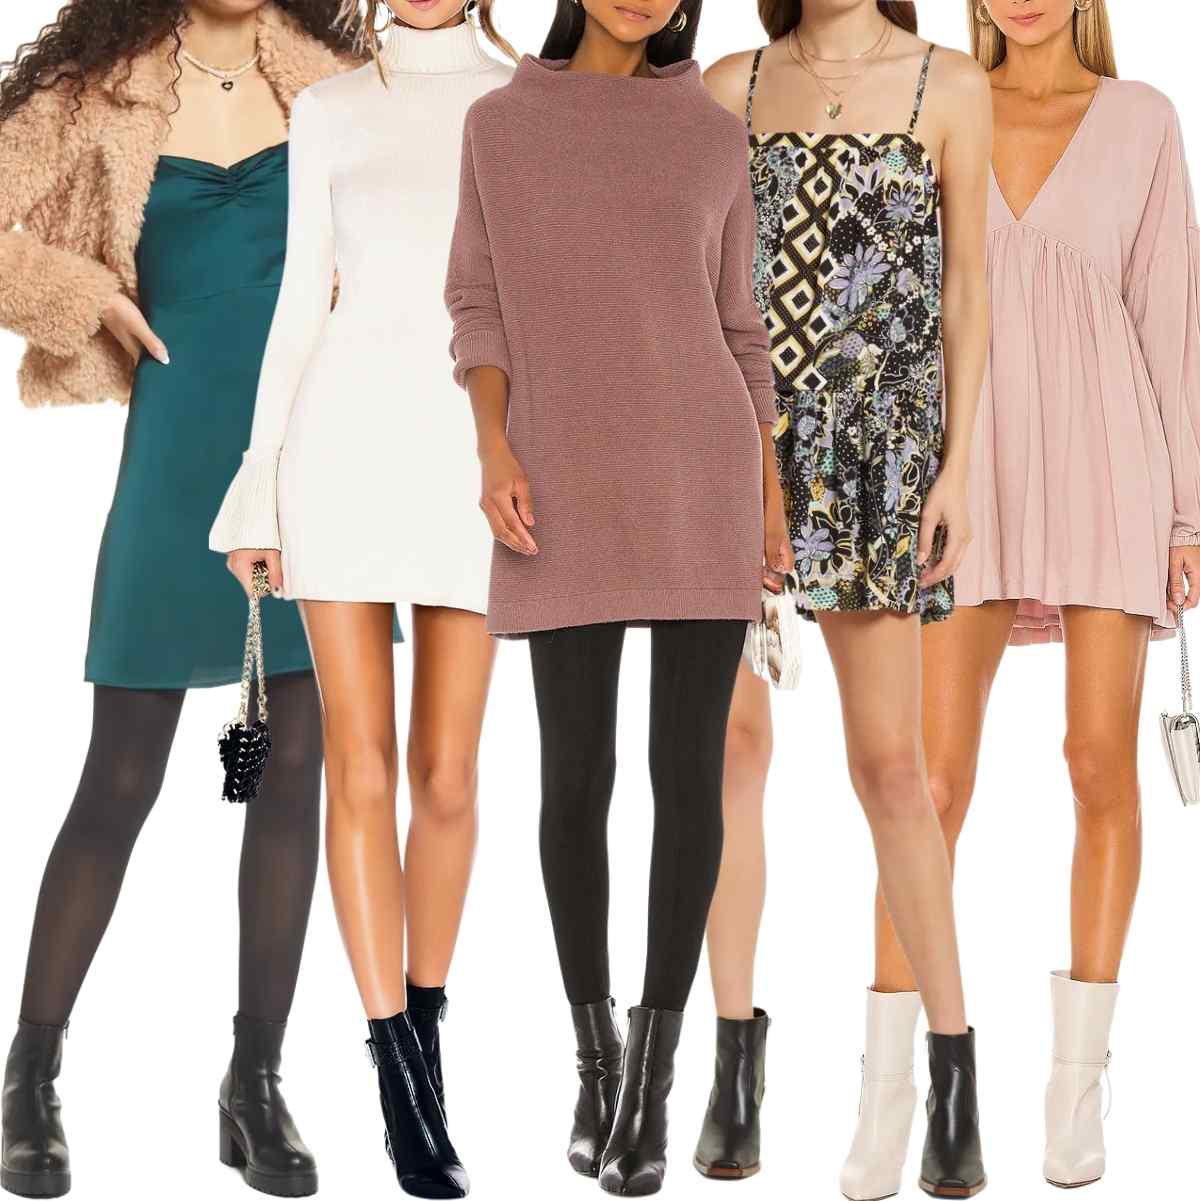 Collage of 5 women wearing different mini dresses with ankle boots.